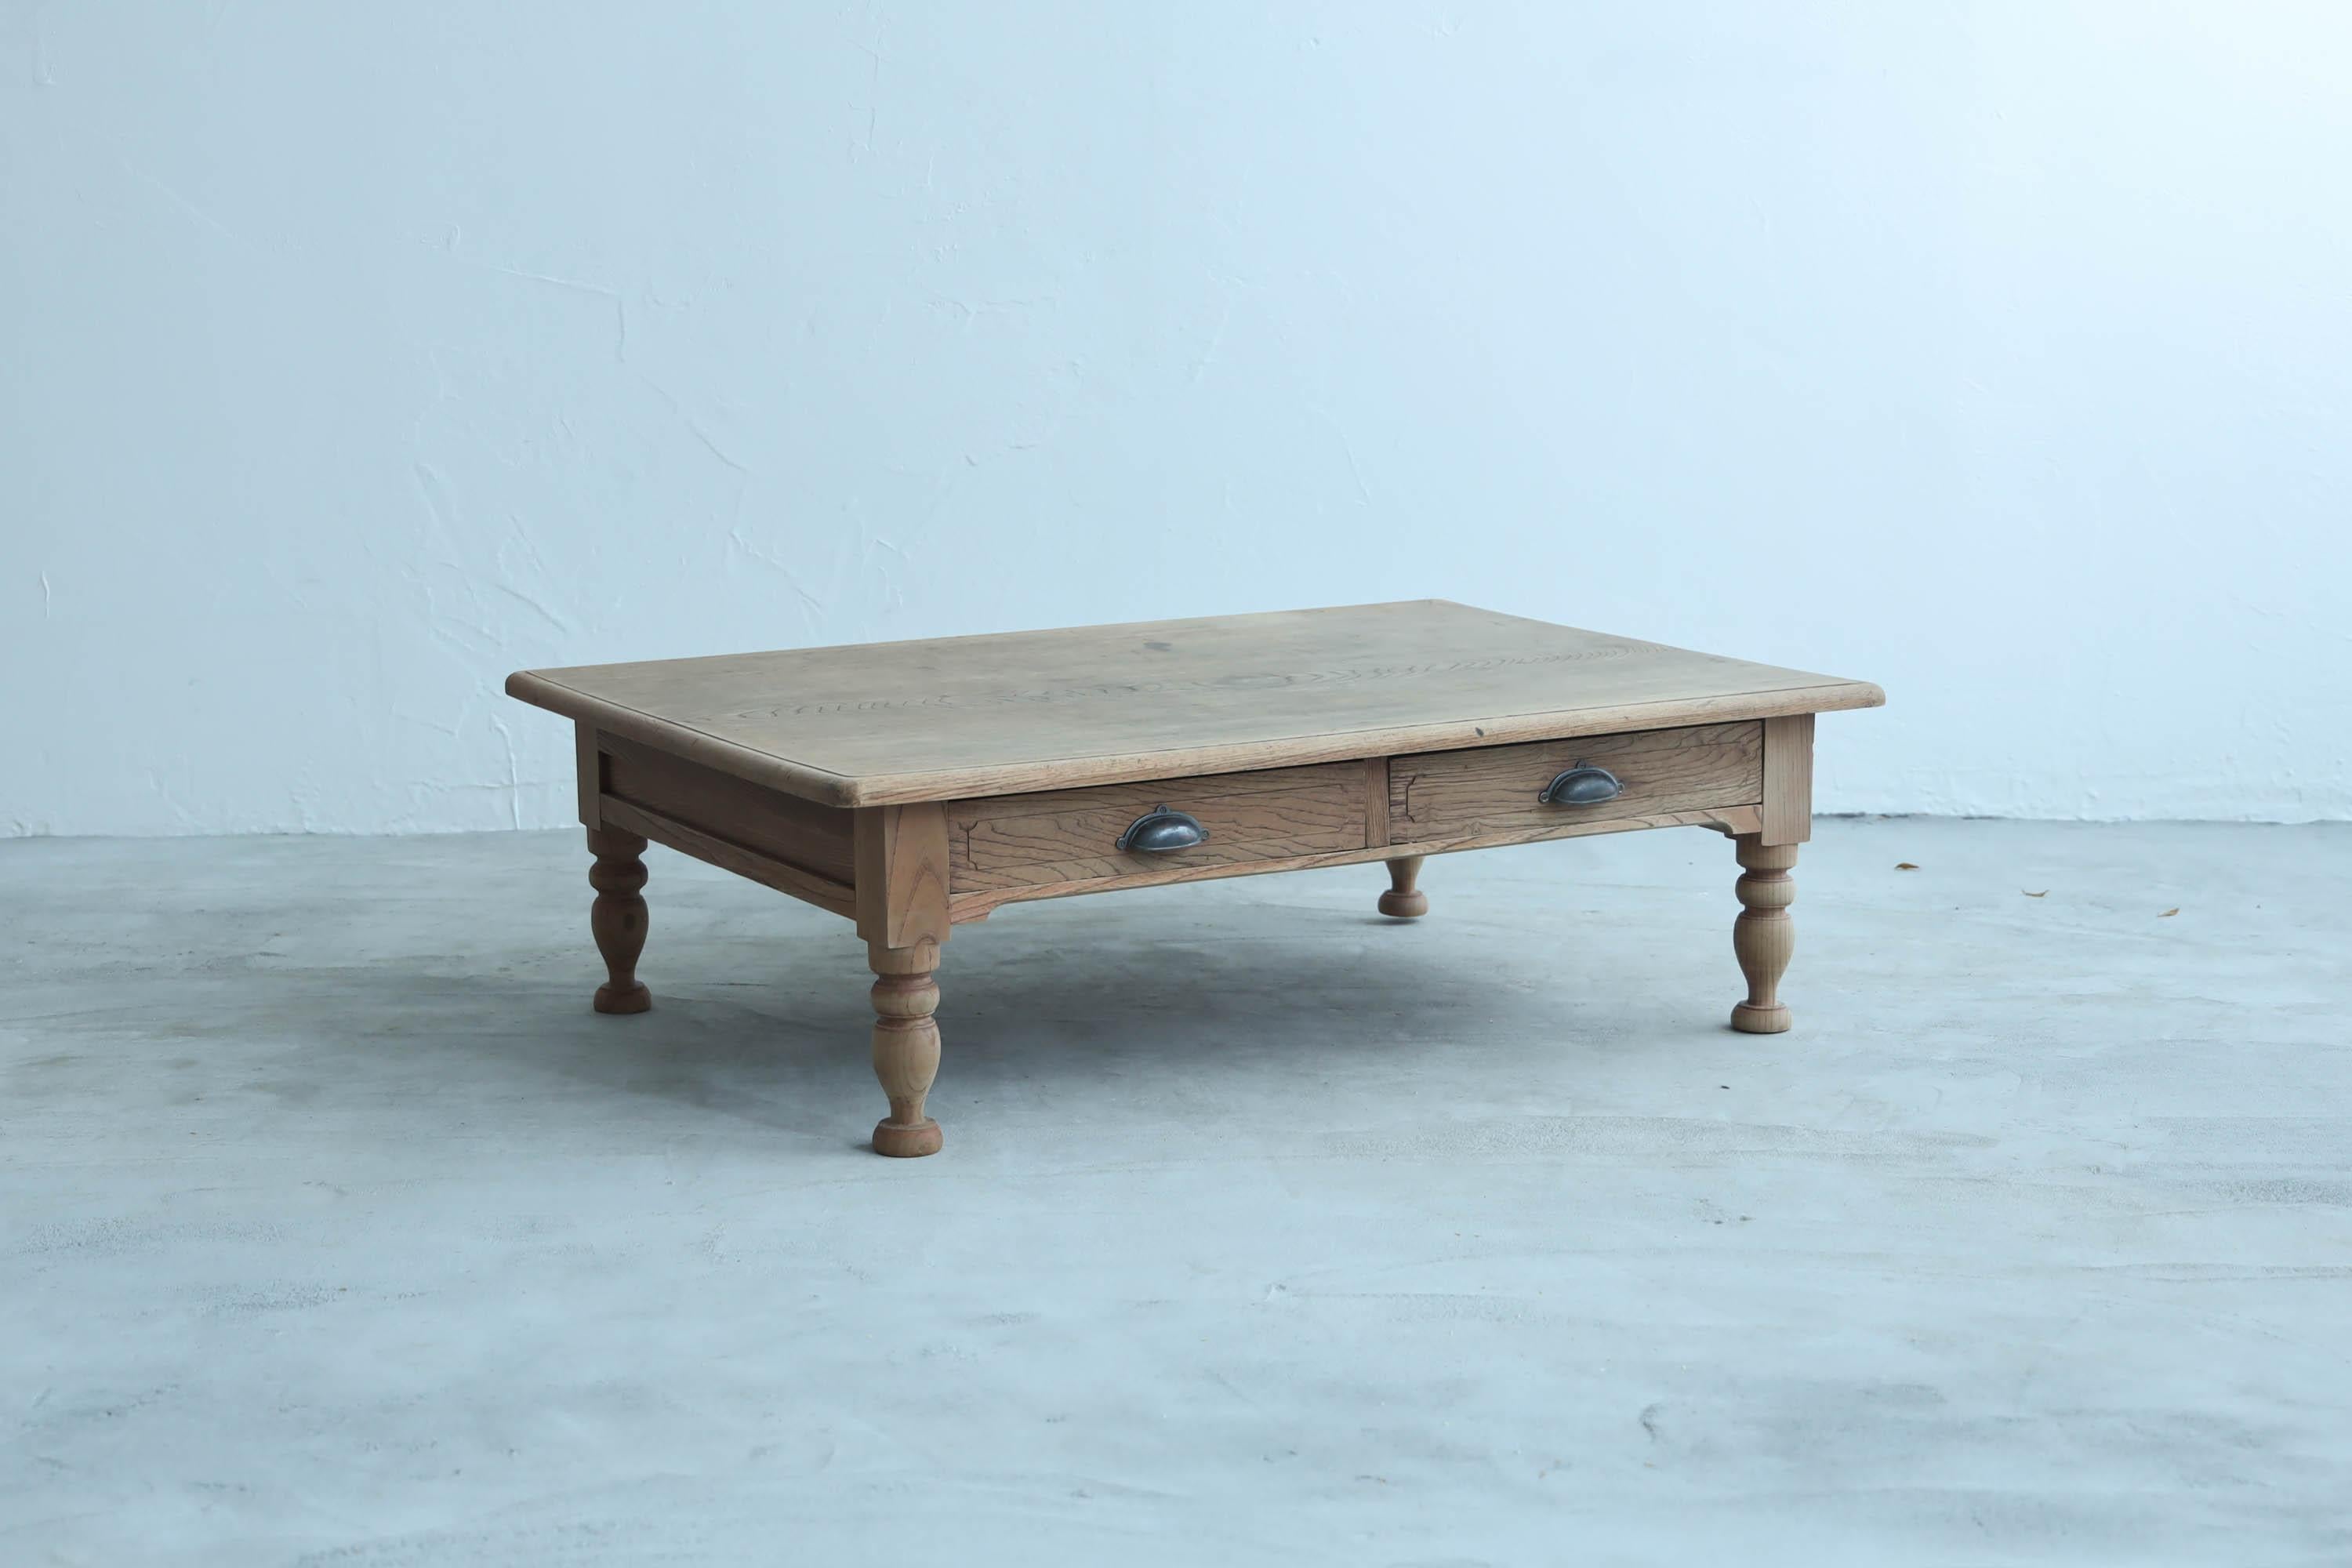 This is a Japanese antique coffee table produced in the Taisho period(1912-1926 CE) .

This furniture was made by applying traditional techniques used in Japanese shrines.

The top panel is made of a single piece of zelkova, a high-grade wood.